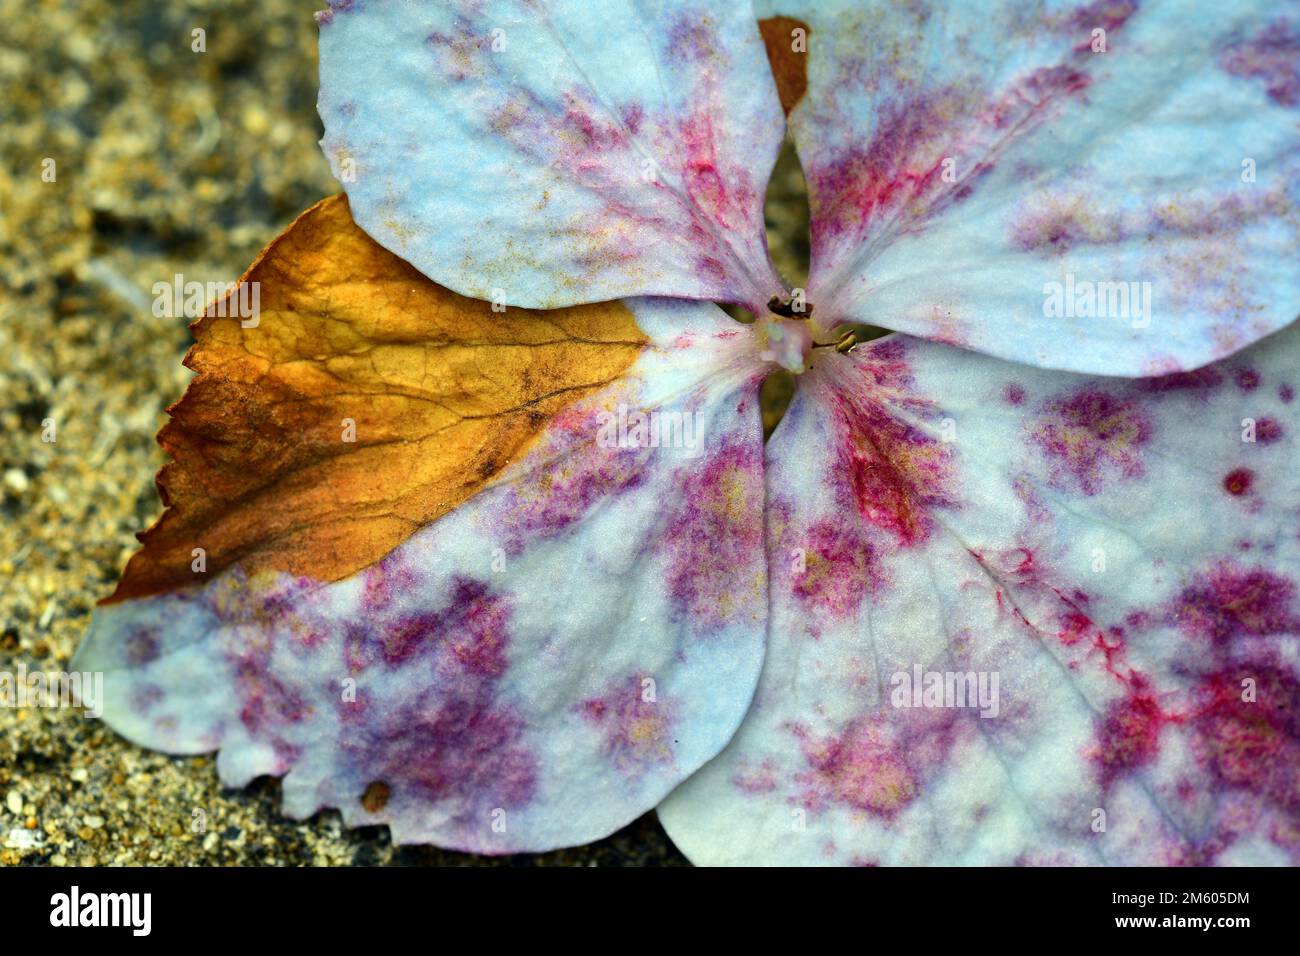 A hydrangea flower affected by Hydrangea Botrytis Blight (Gray Mold) caused by fungus Botrytis cinerea. Stock Photo